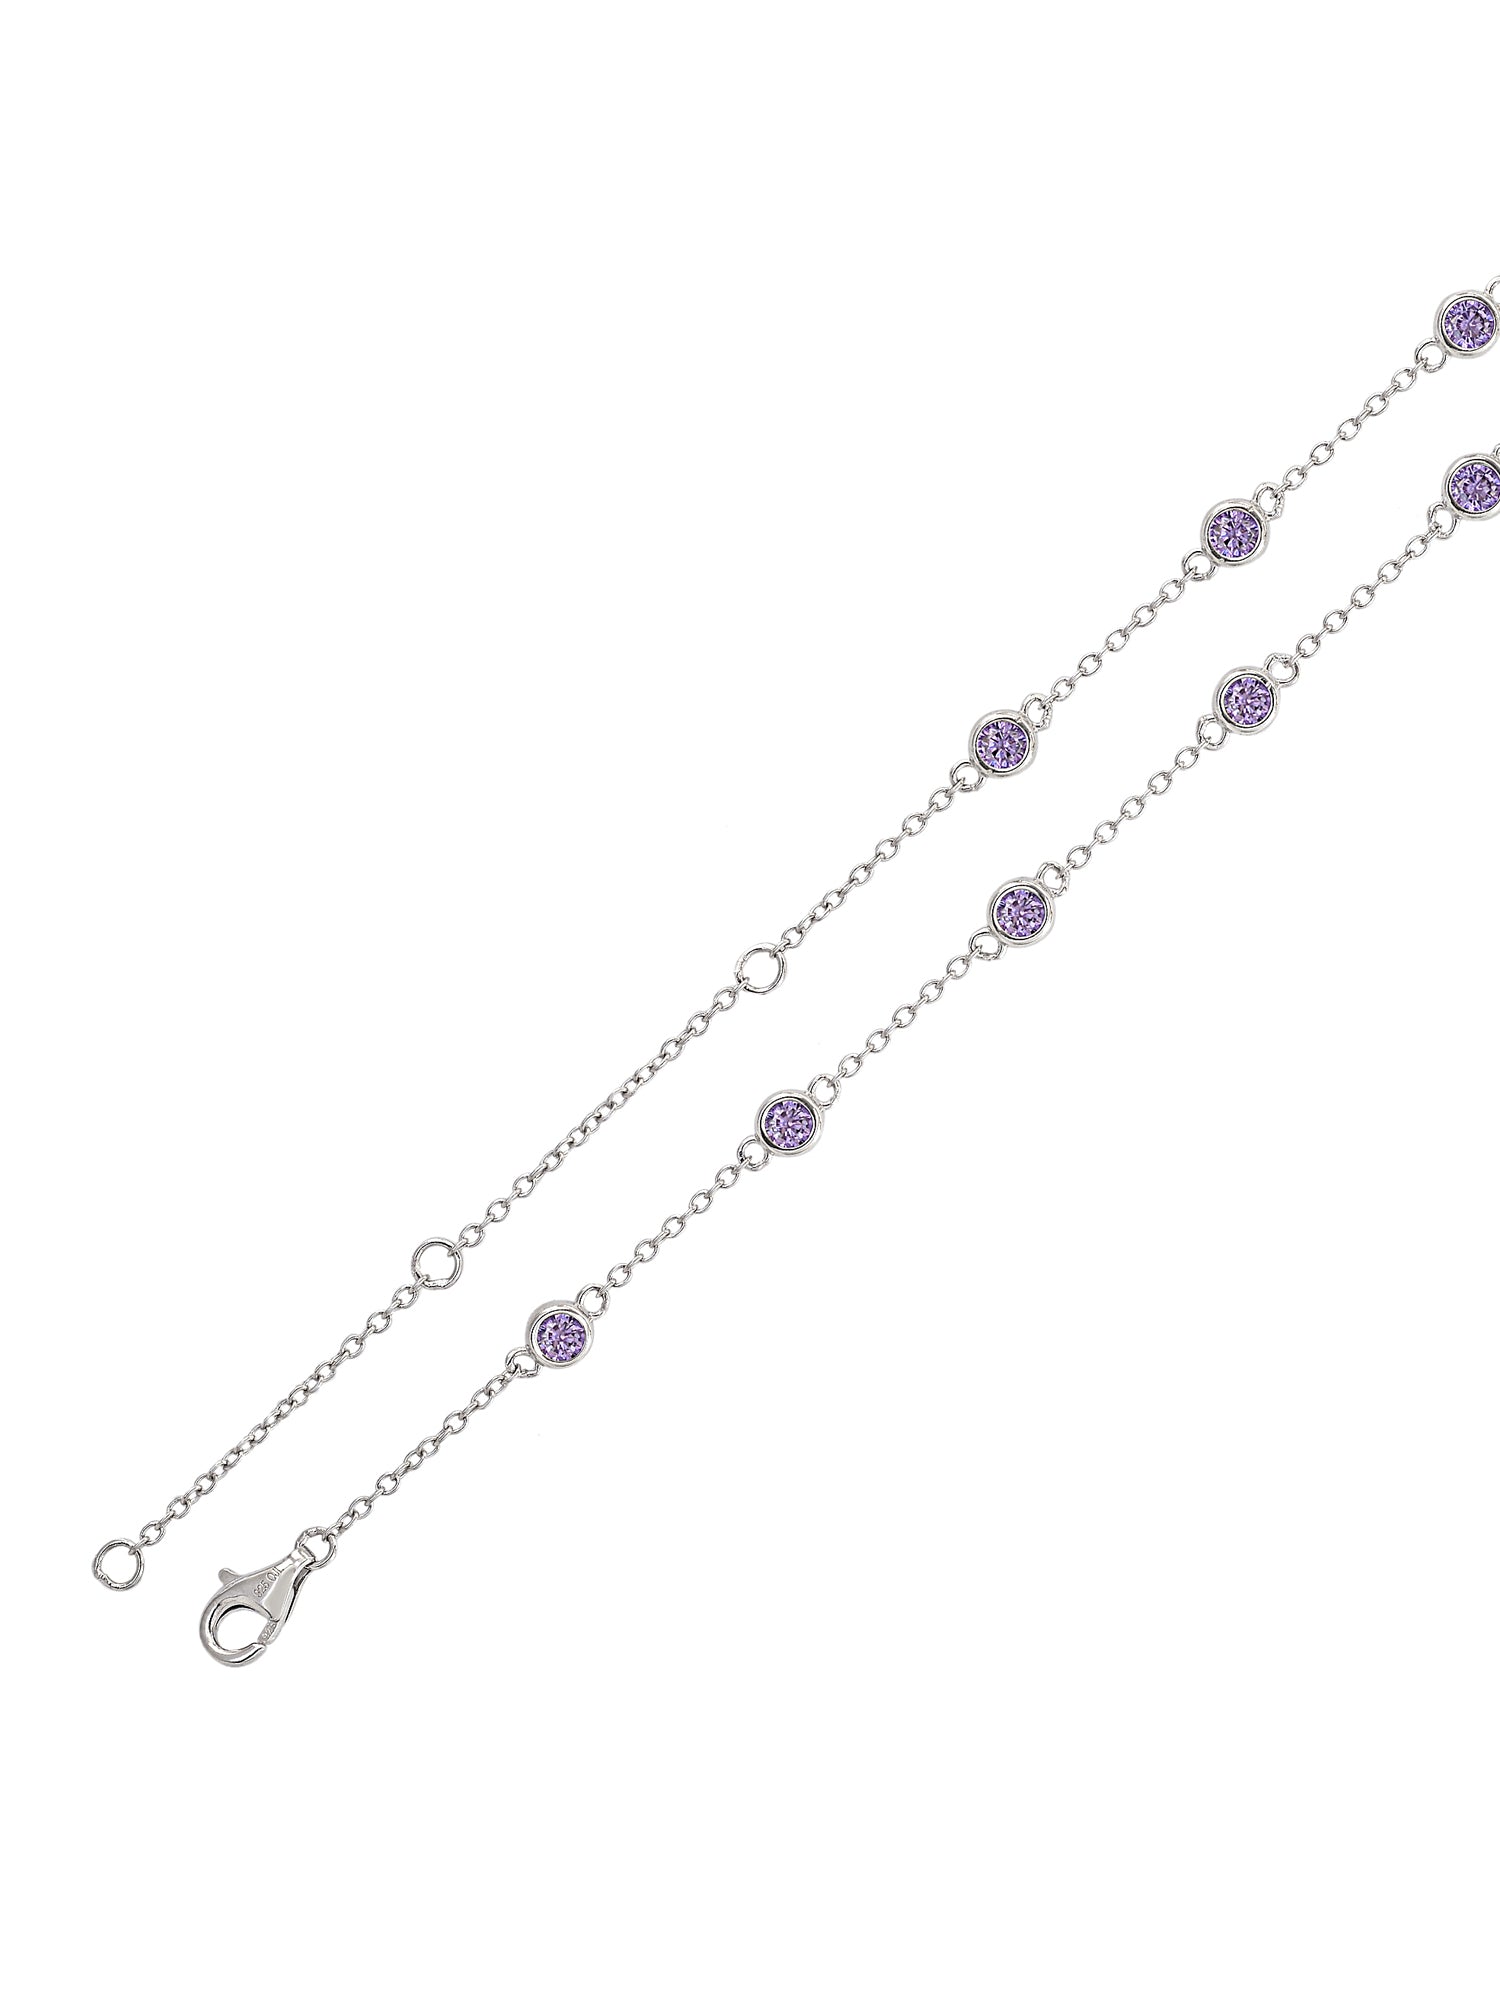 AMETHYST SILVER NECKLACE FOR WOMEN-5